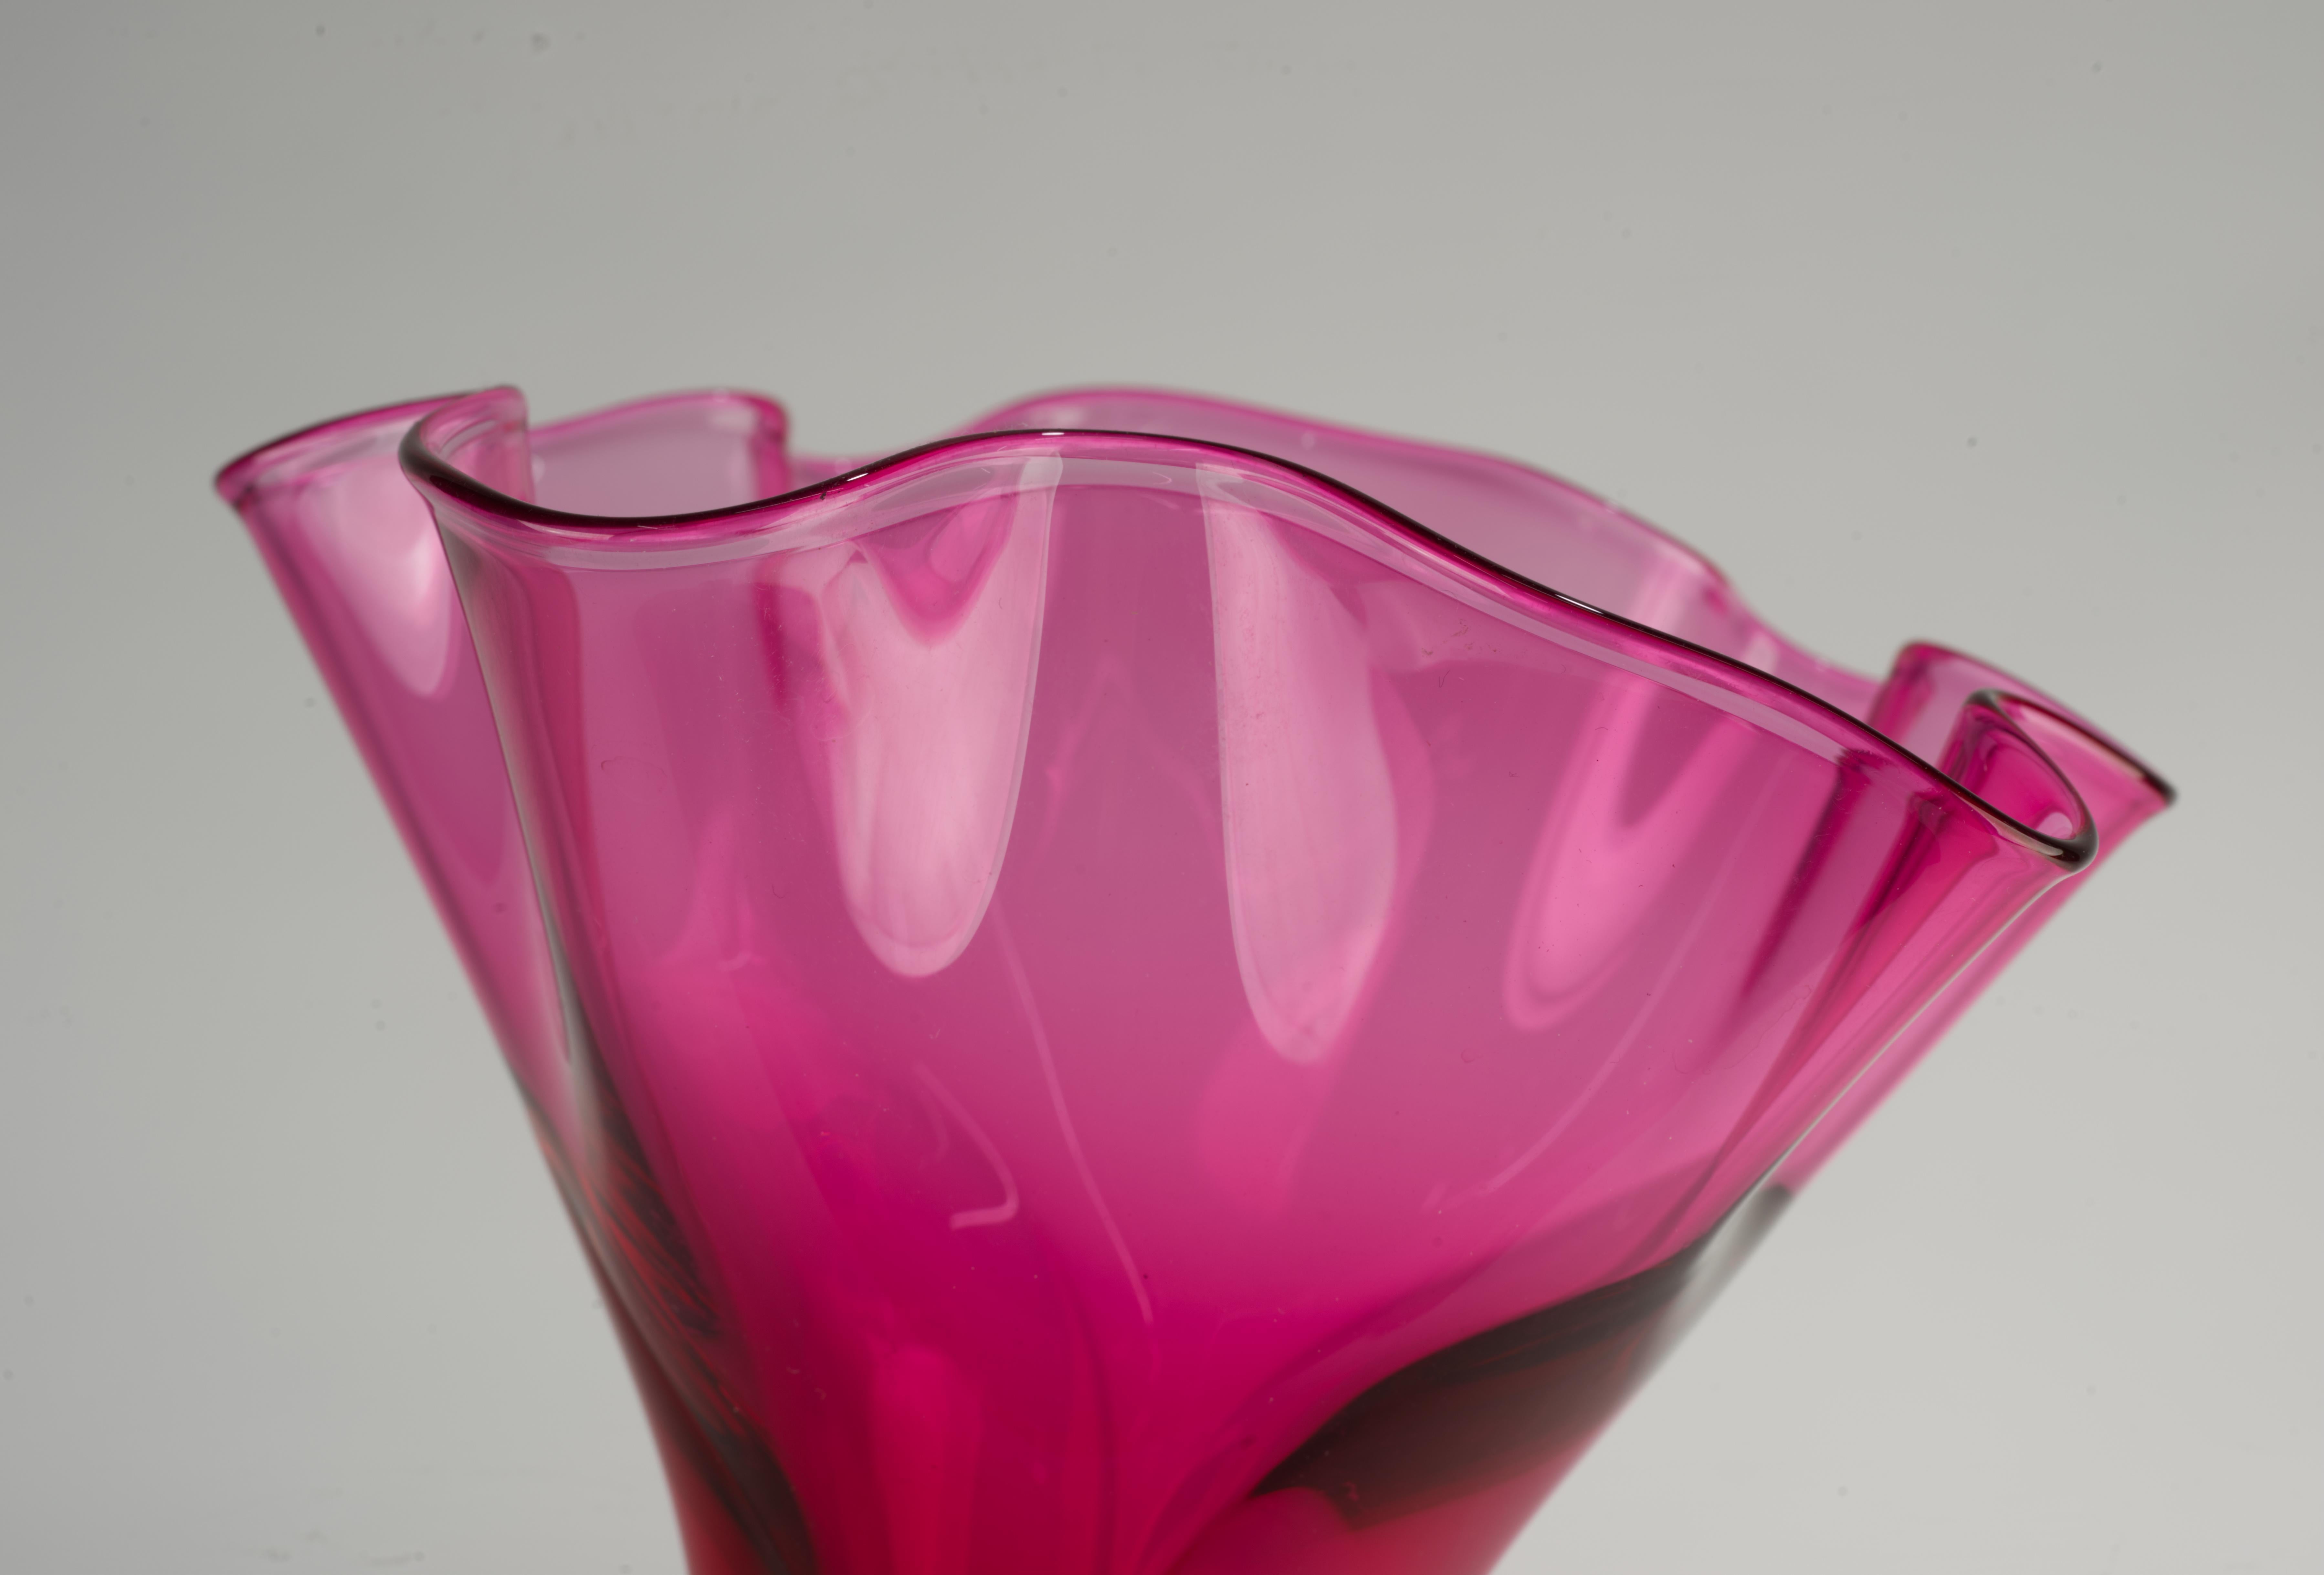 Hand Blown Glass Flower Top Vase was made in a graphic combination of deep pink glass encased in clear glass, using the Venetian sommerso technique. Soft, sensual form of trumpet vase mouth creates complex, asymmetrical pattern, rich in color and